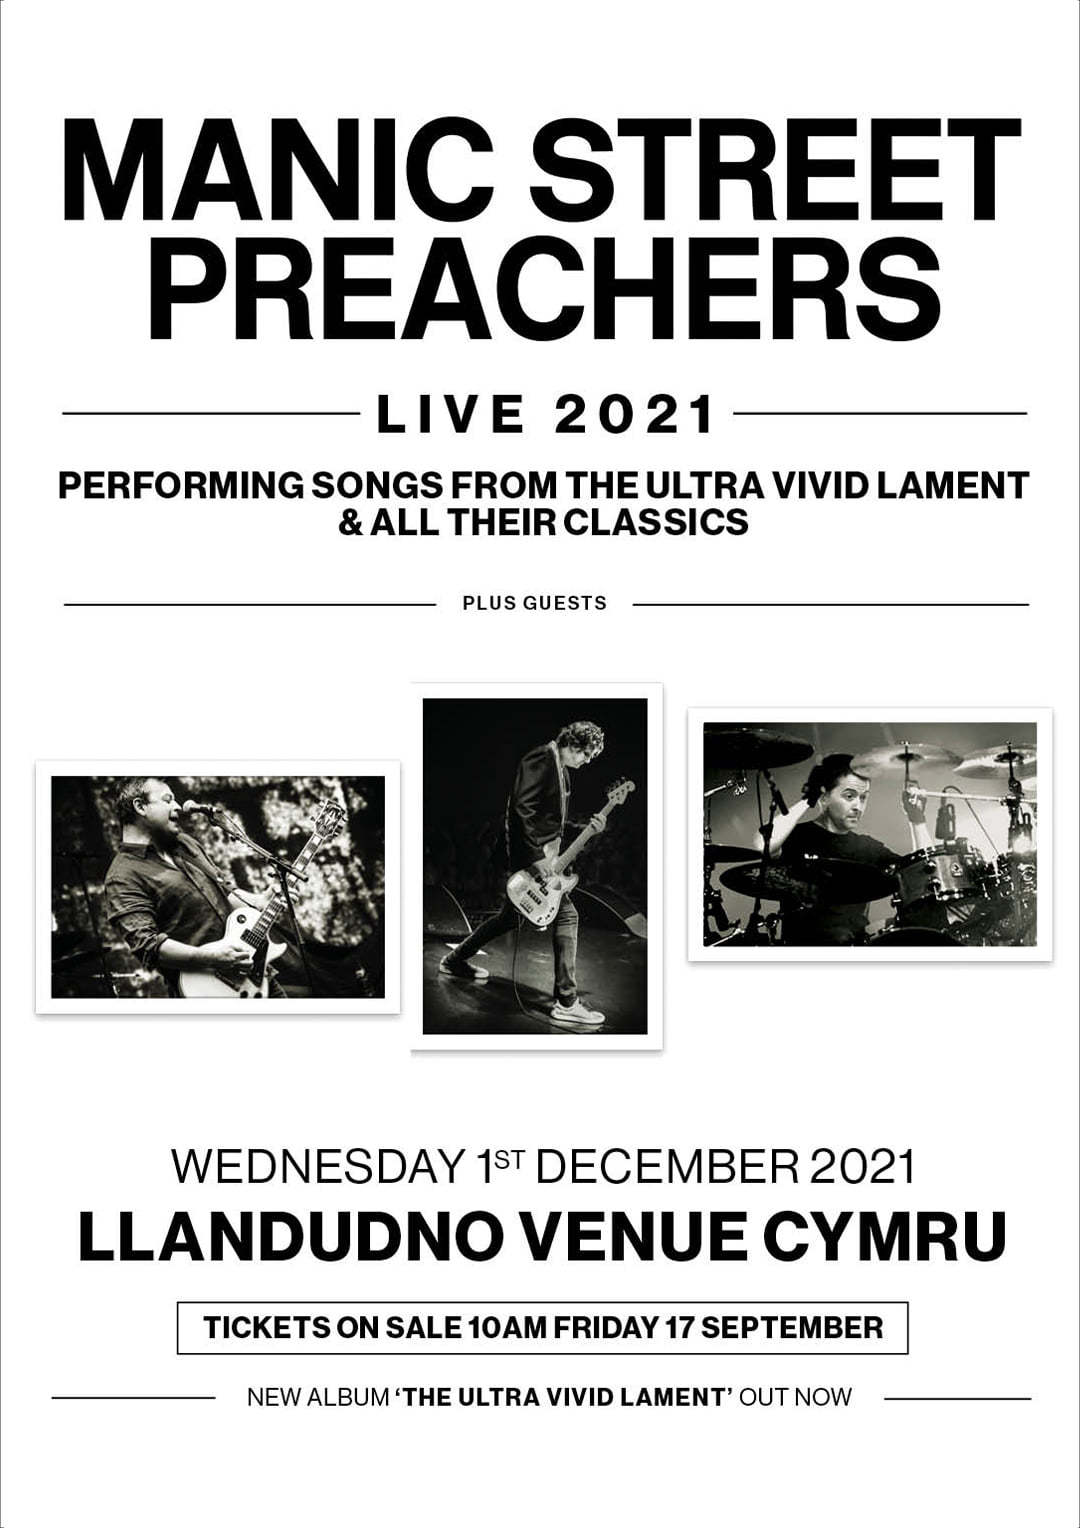 Manic Street Preachers have added Llandudno to their UK tour later this year.